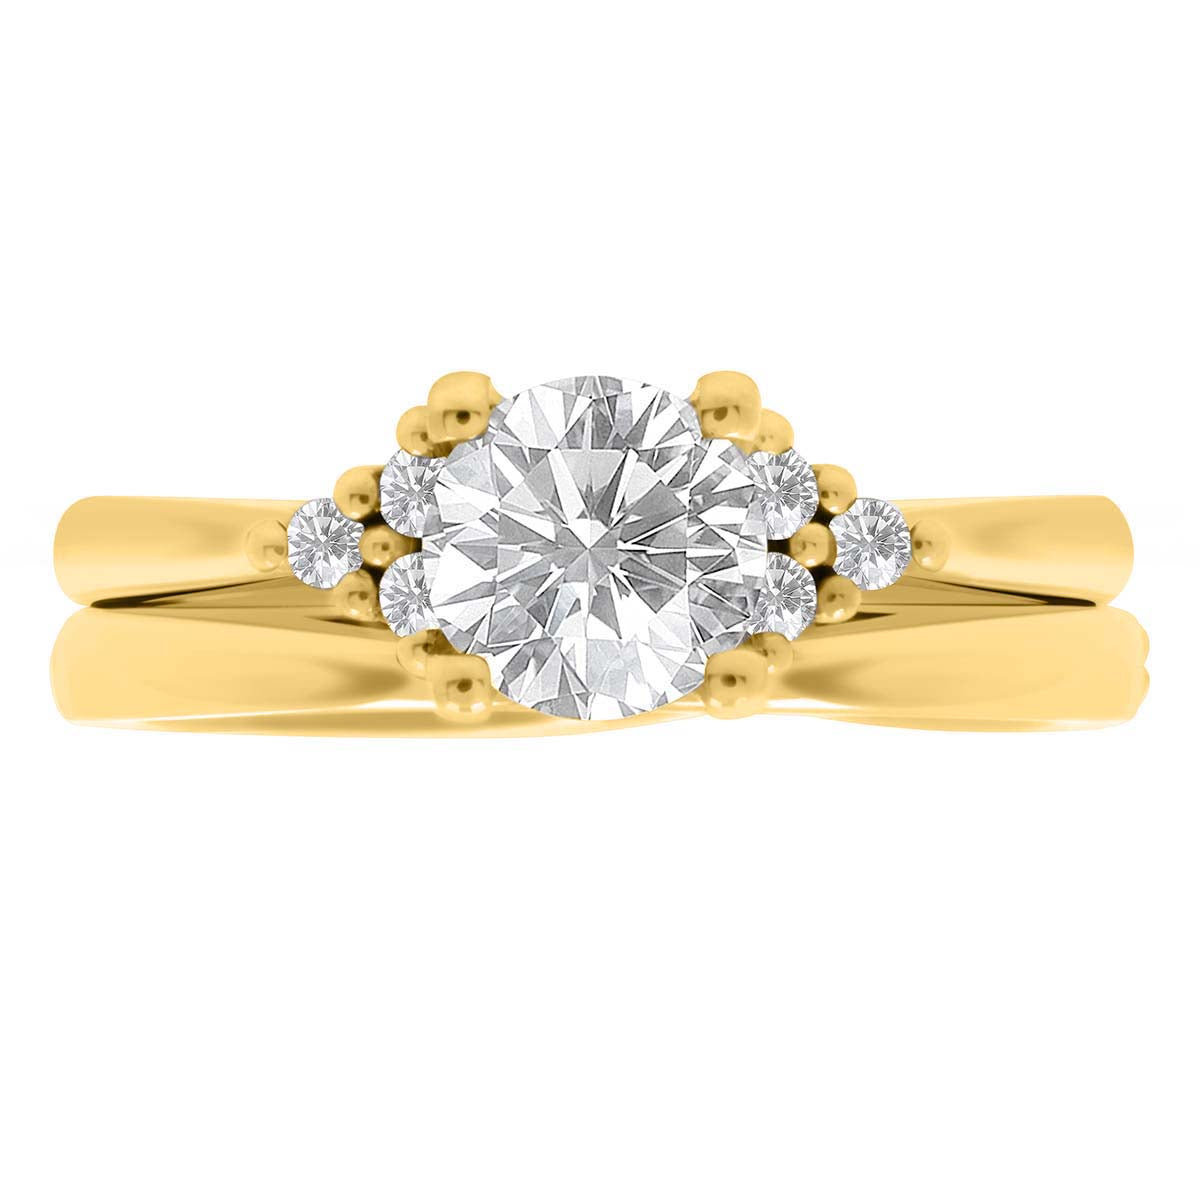 Handmade Engagement Ring in yellow gold with matching plain wedding ring